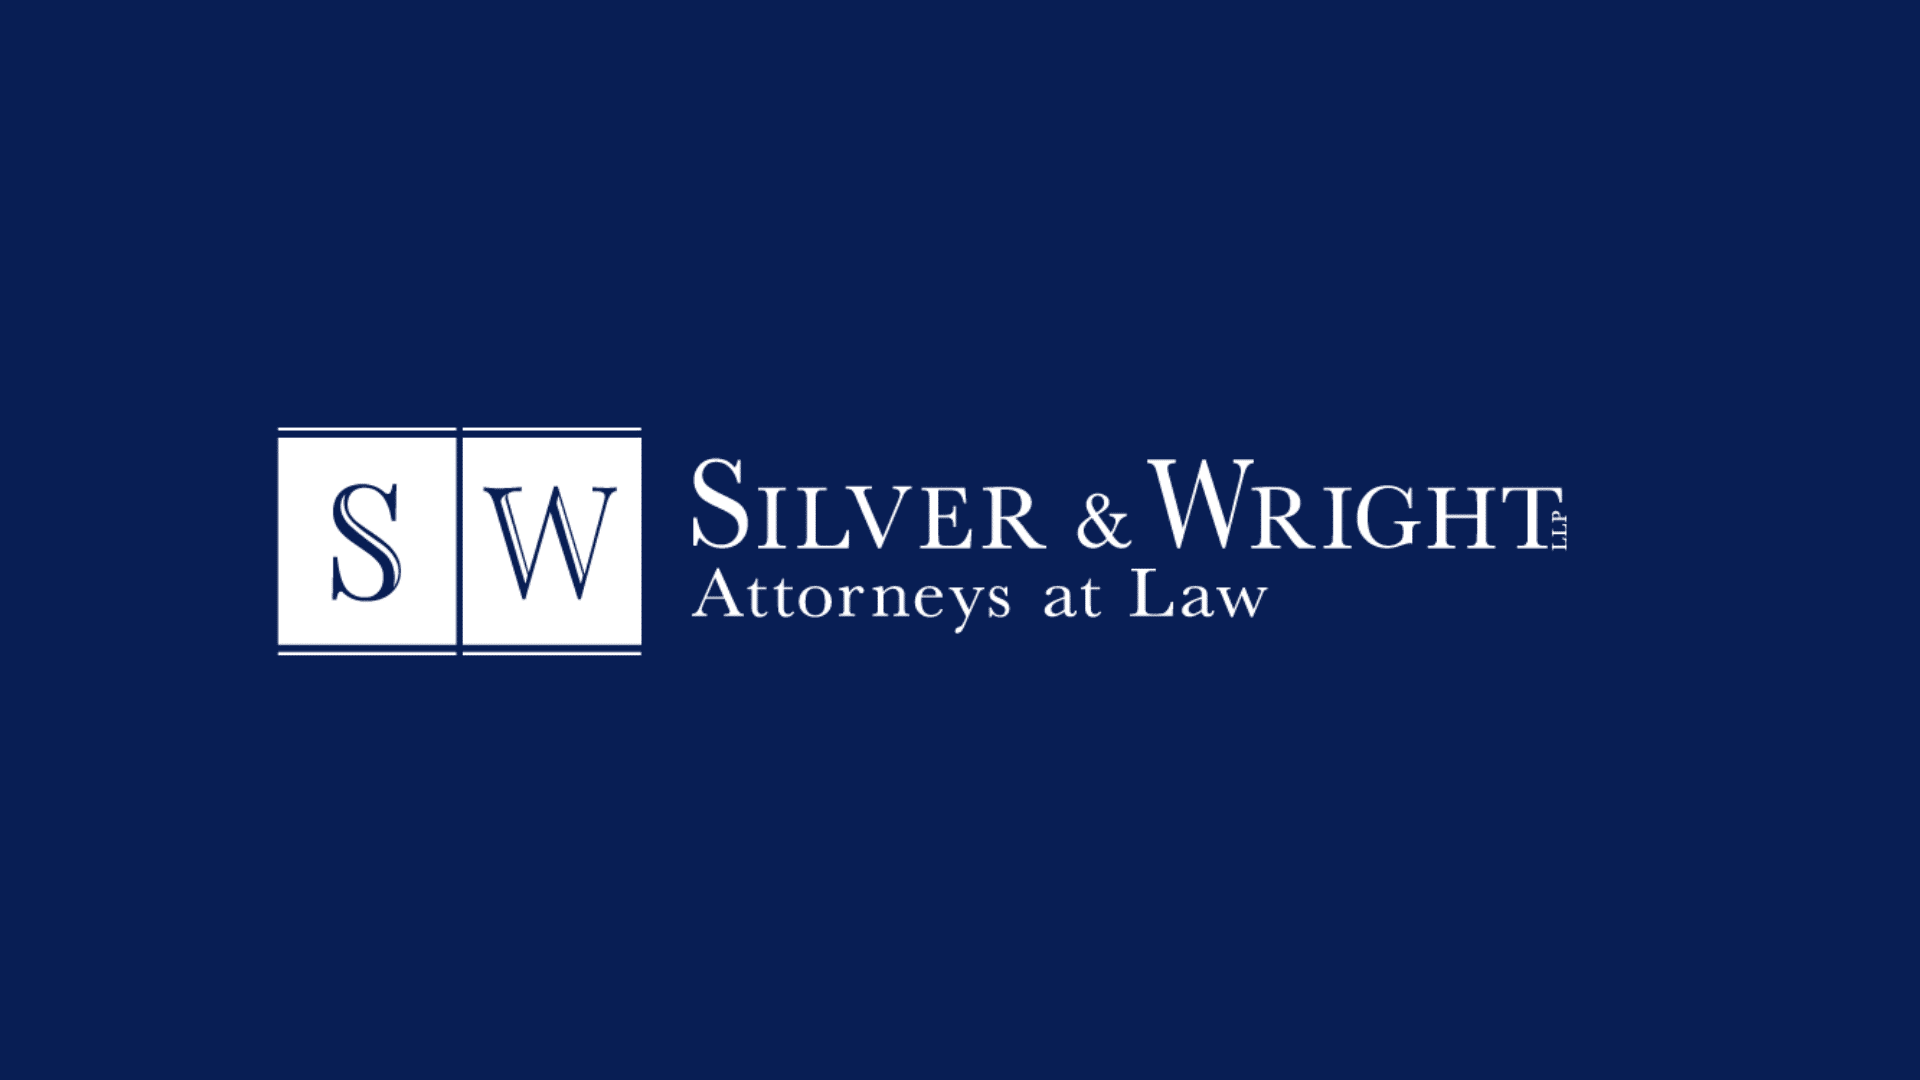 Silver & Wright LLP and The Priority Center Unite to Break the Cycle of Trauma: A Heartwarming Benefit to Support Vulnerable Families